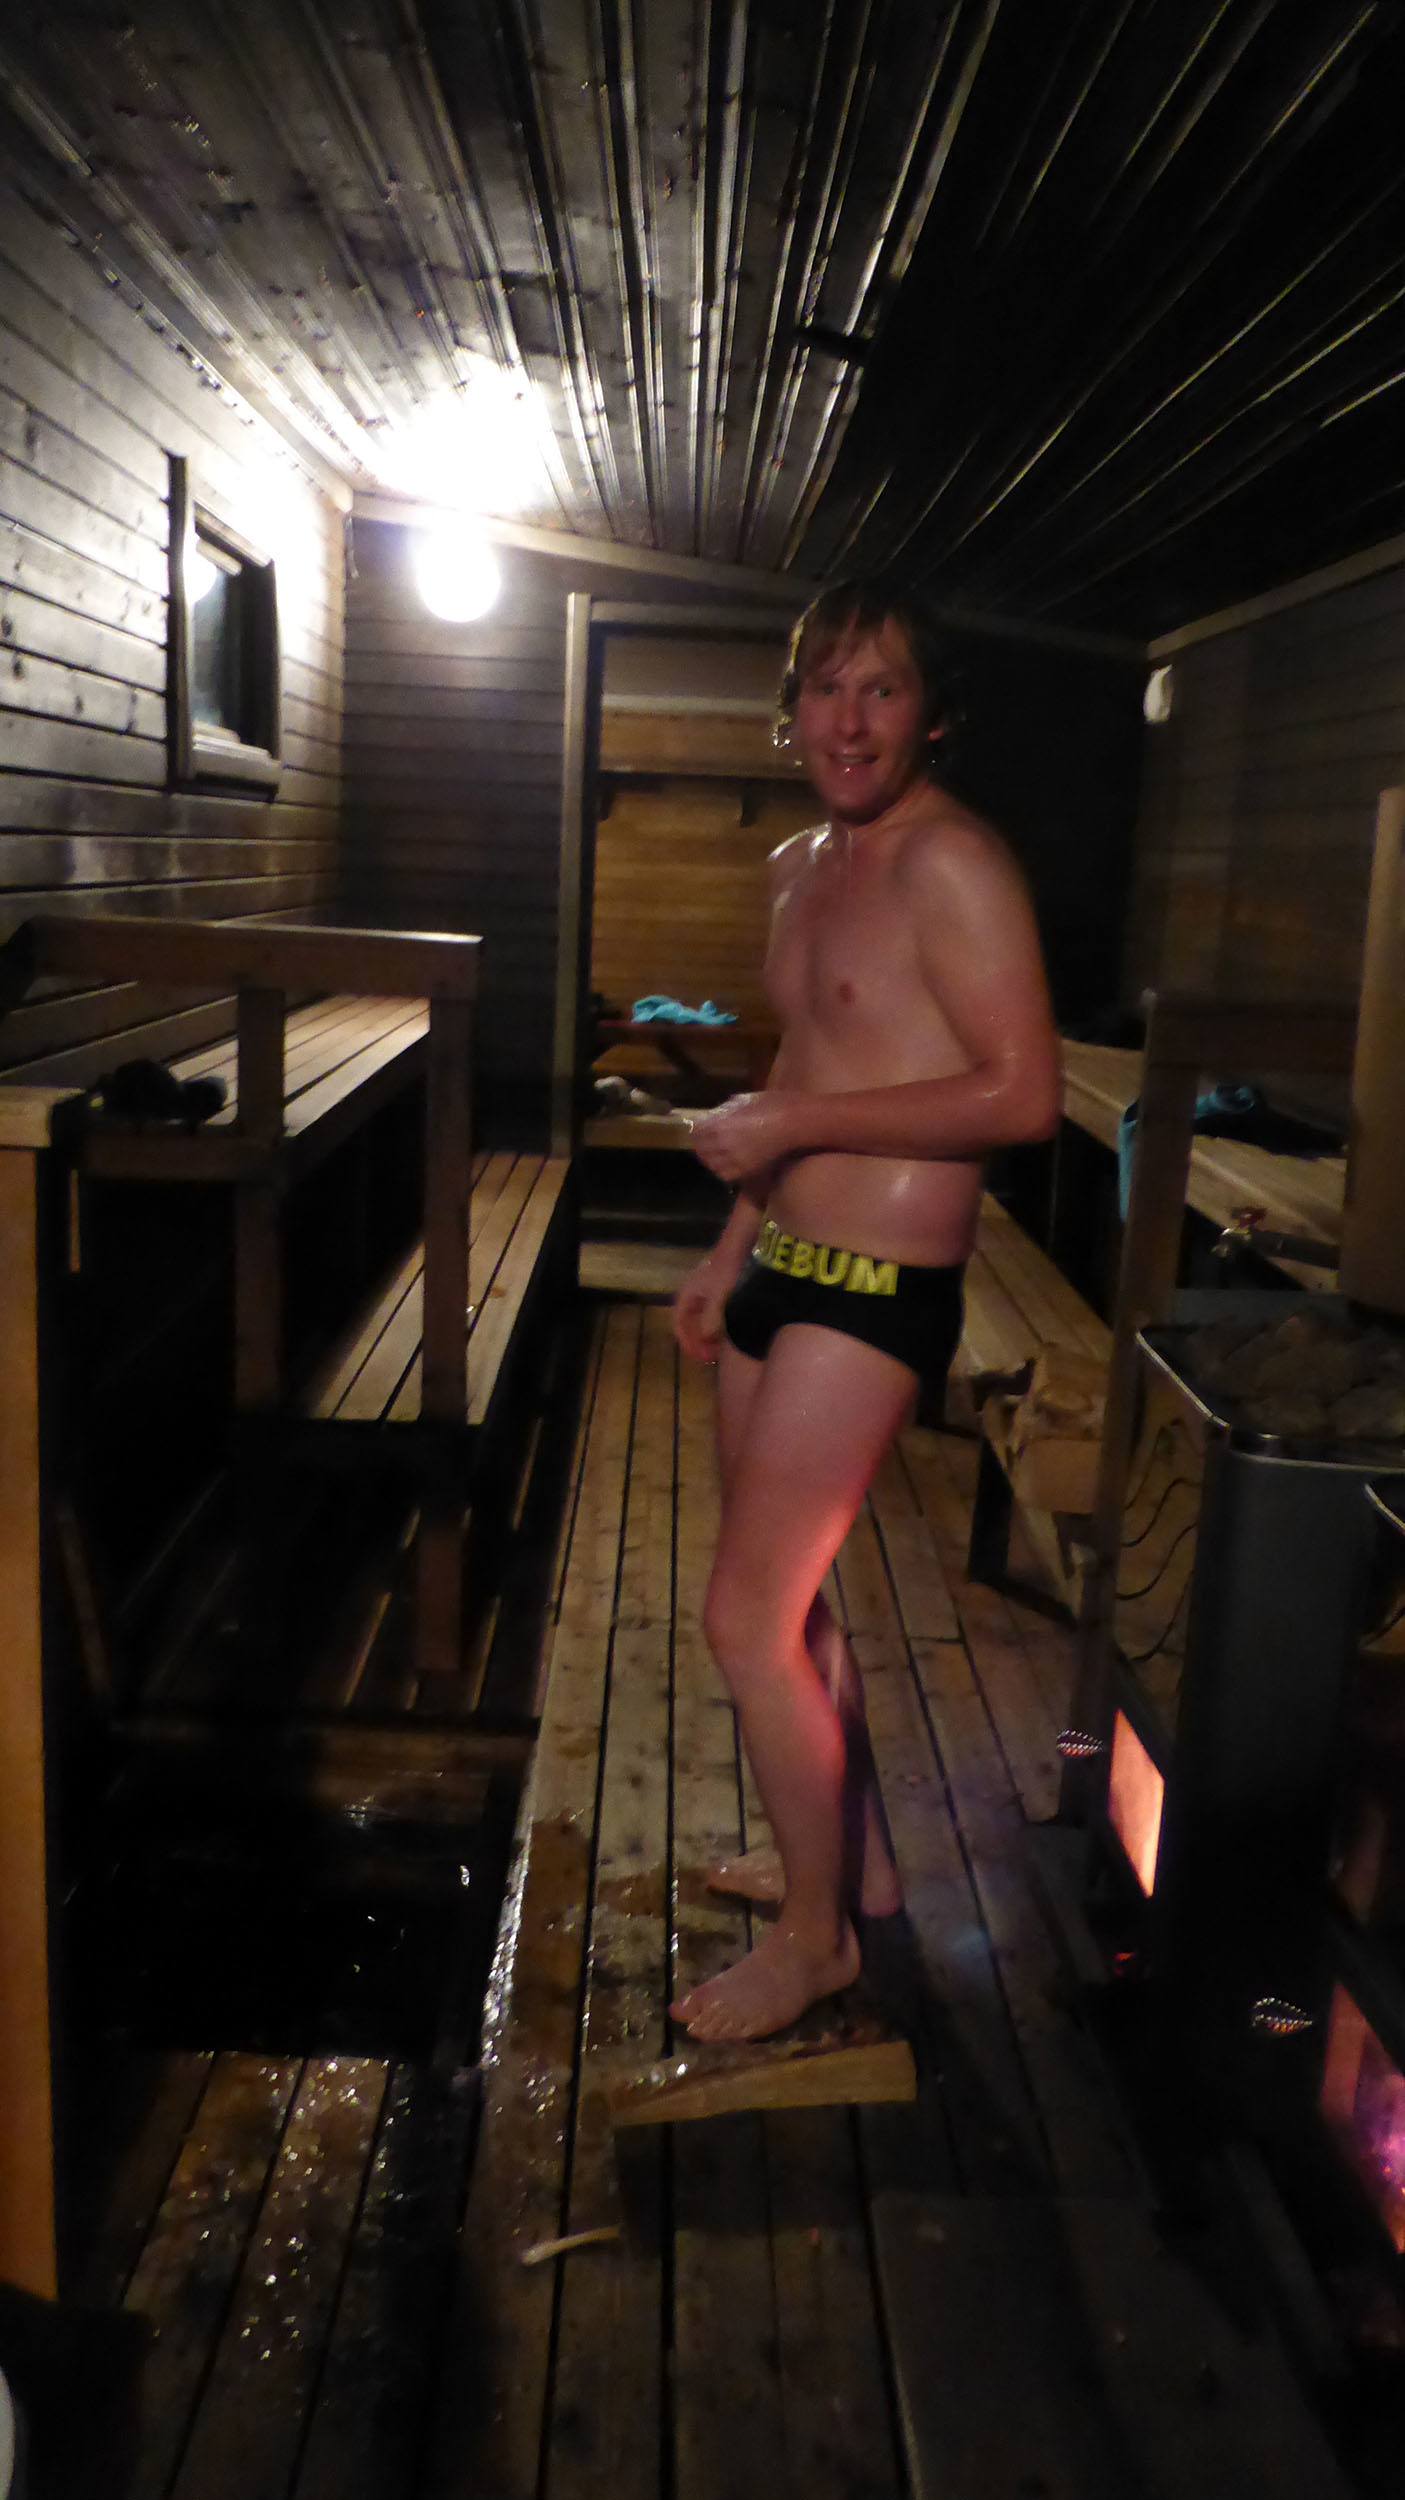 Ben in the sauna at Camp Alta Sweden after having plunged into the icy waters of the frozen lake